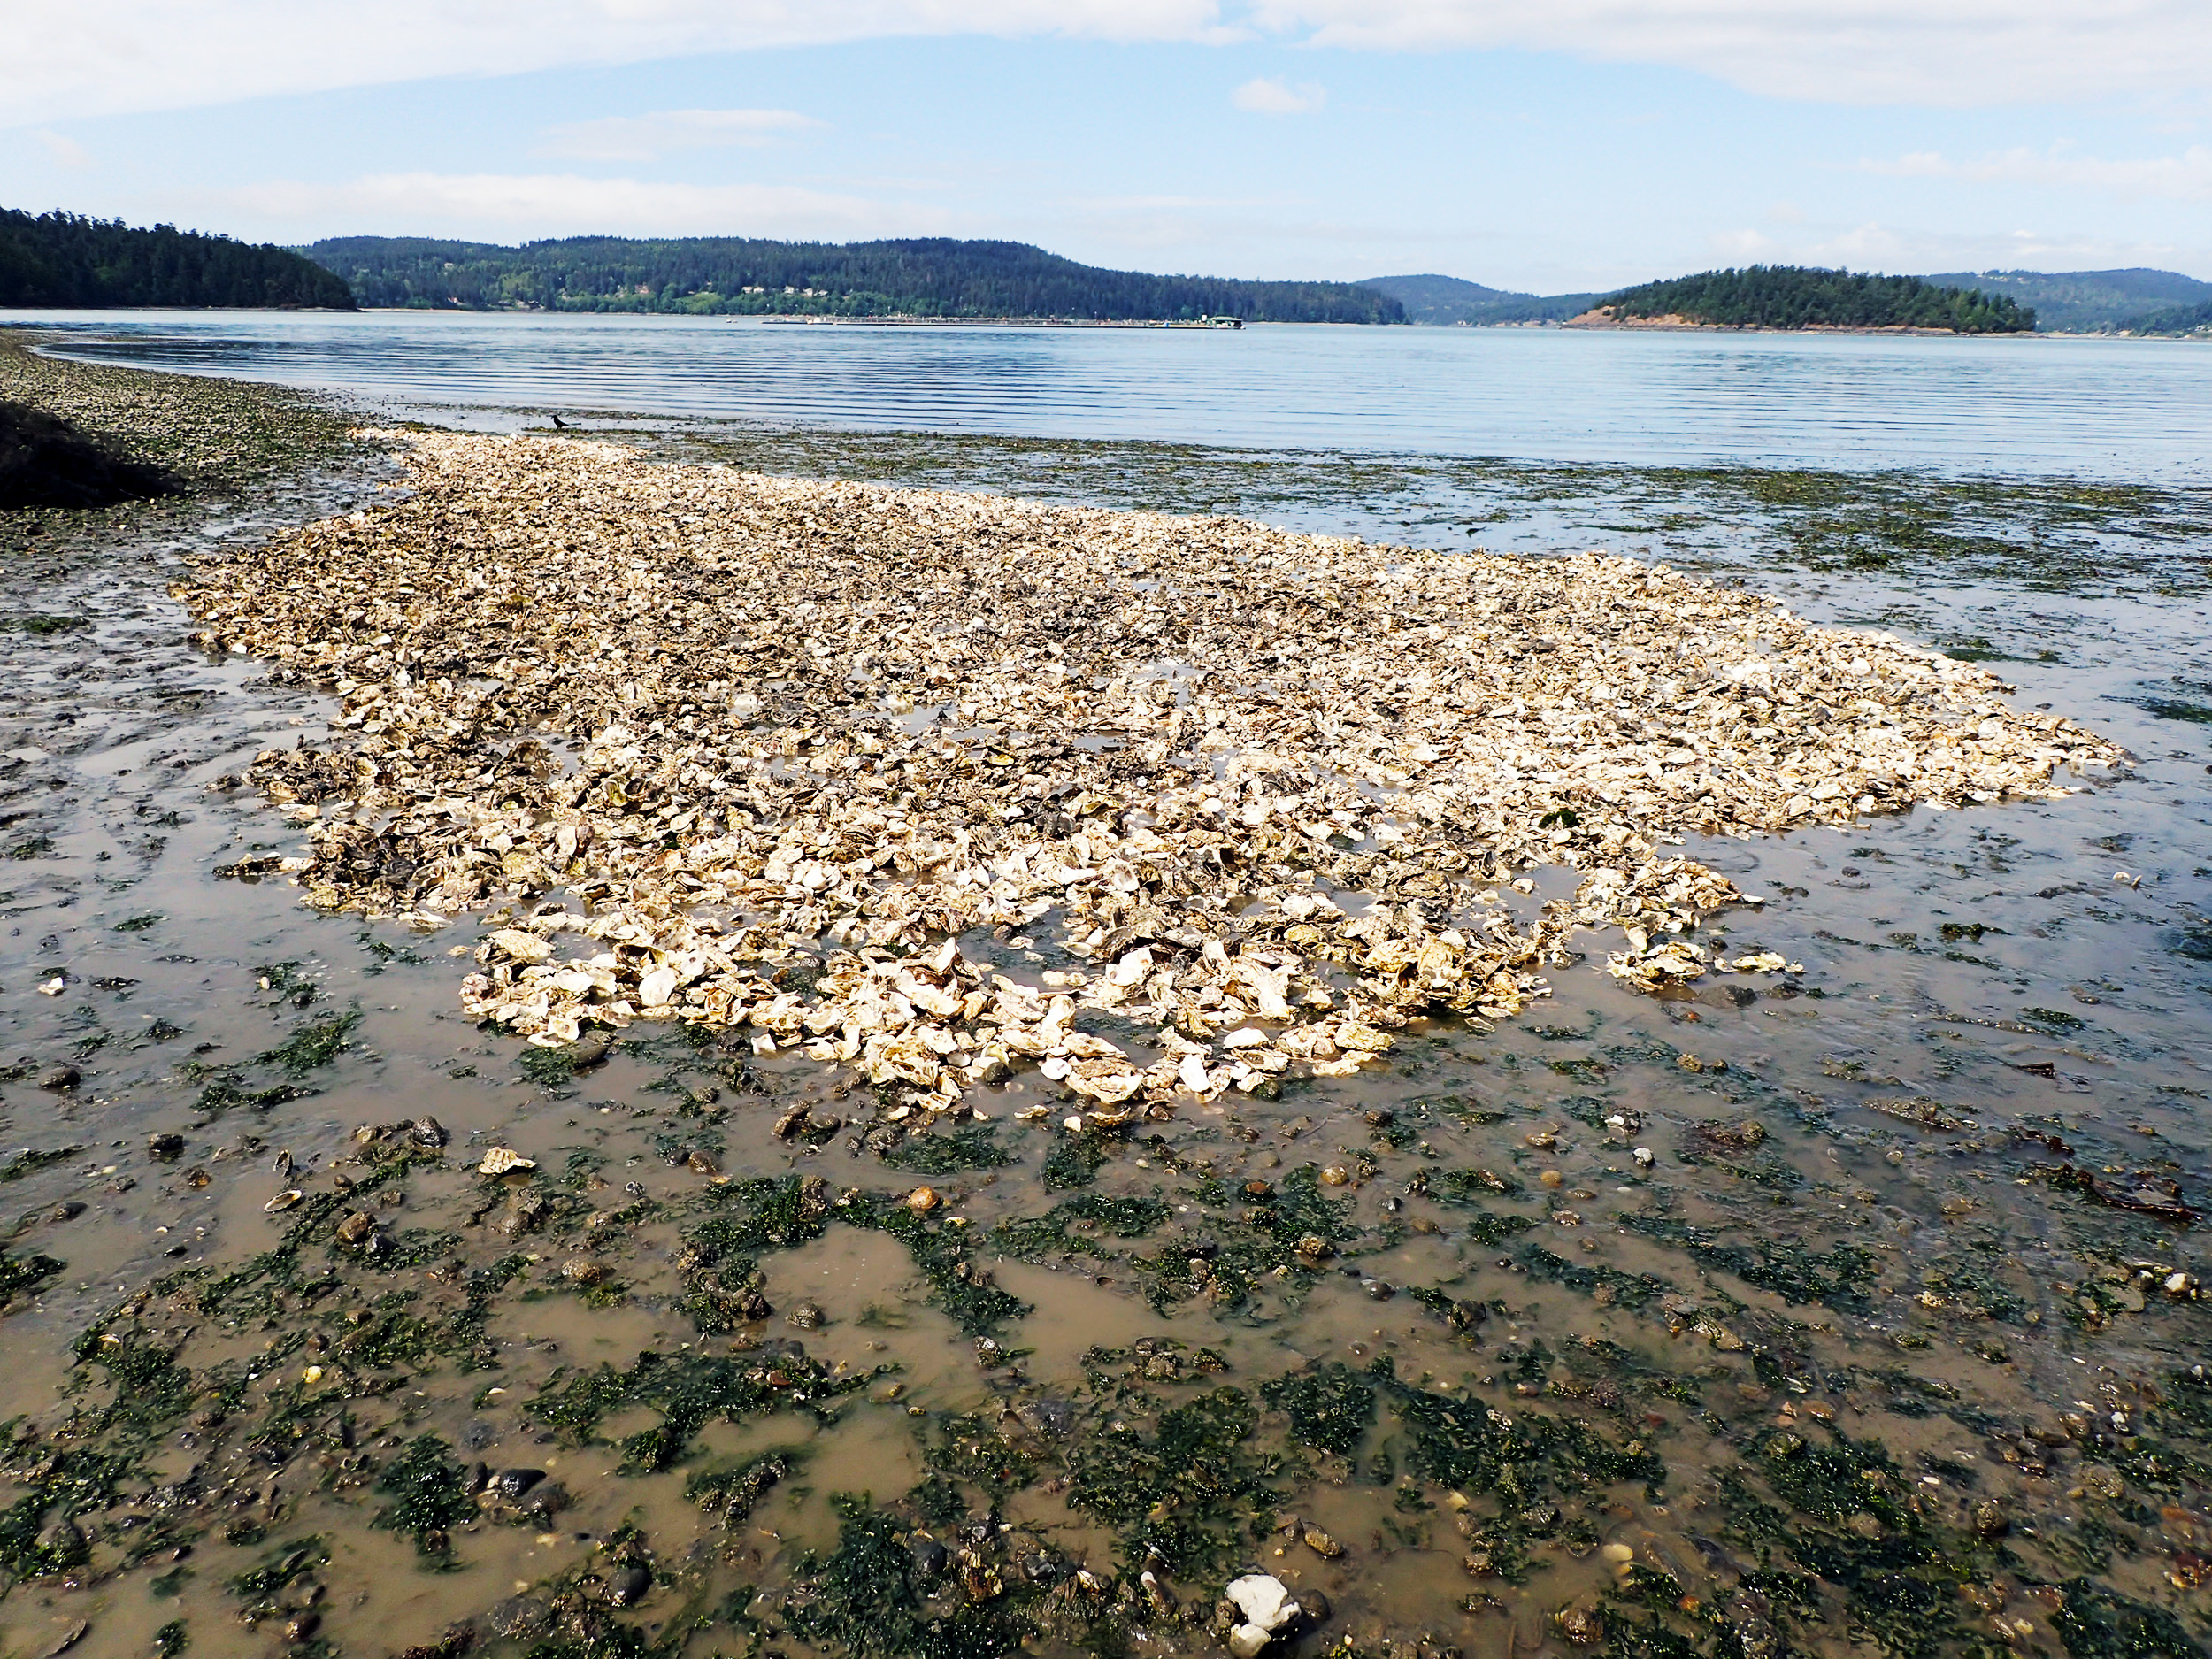  Newly spread oyster shell should provide the habitat-limited Olympia oyster larvae with a place to settle and grow. Restoring the habitat for this native oyster is one step toward providing the species with the means to naturally expand their beds o